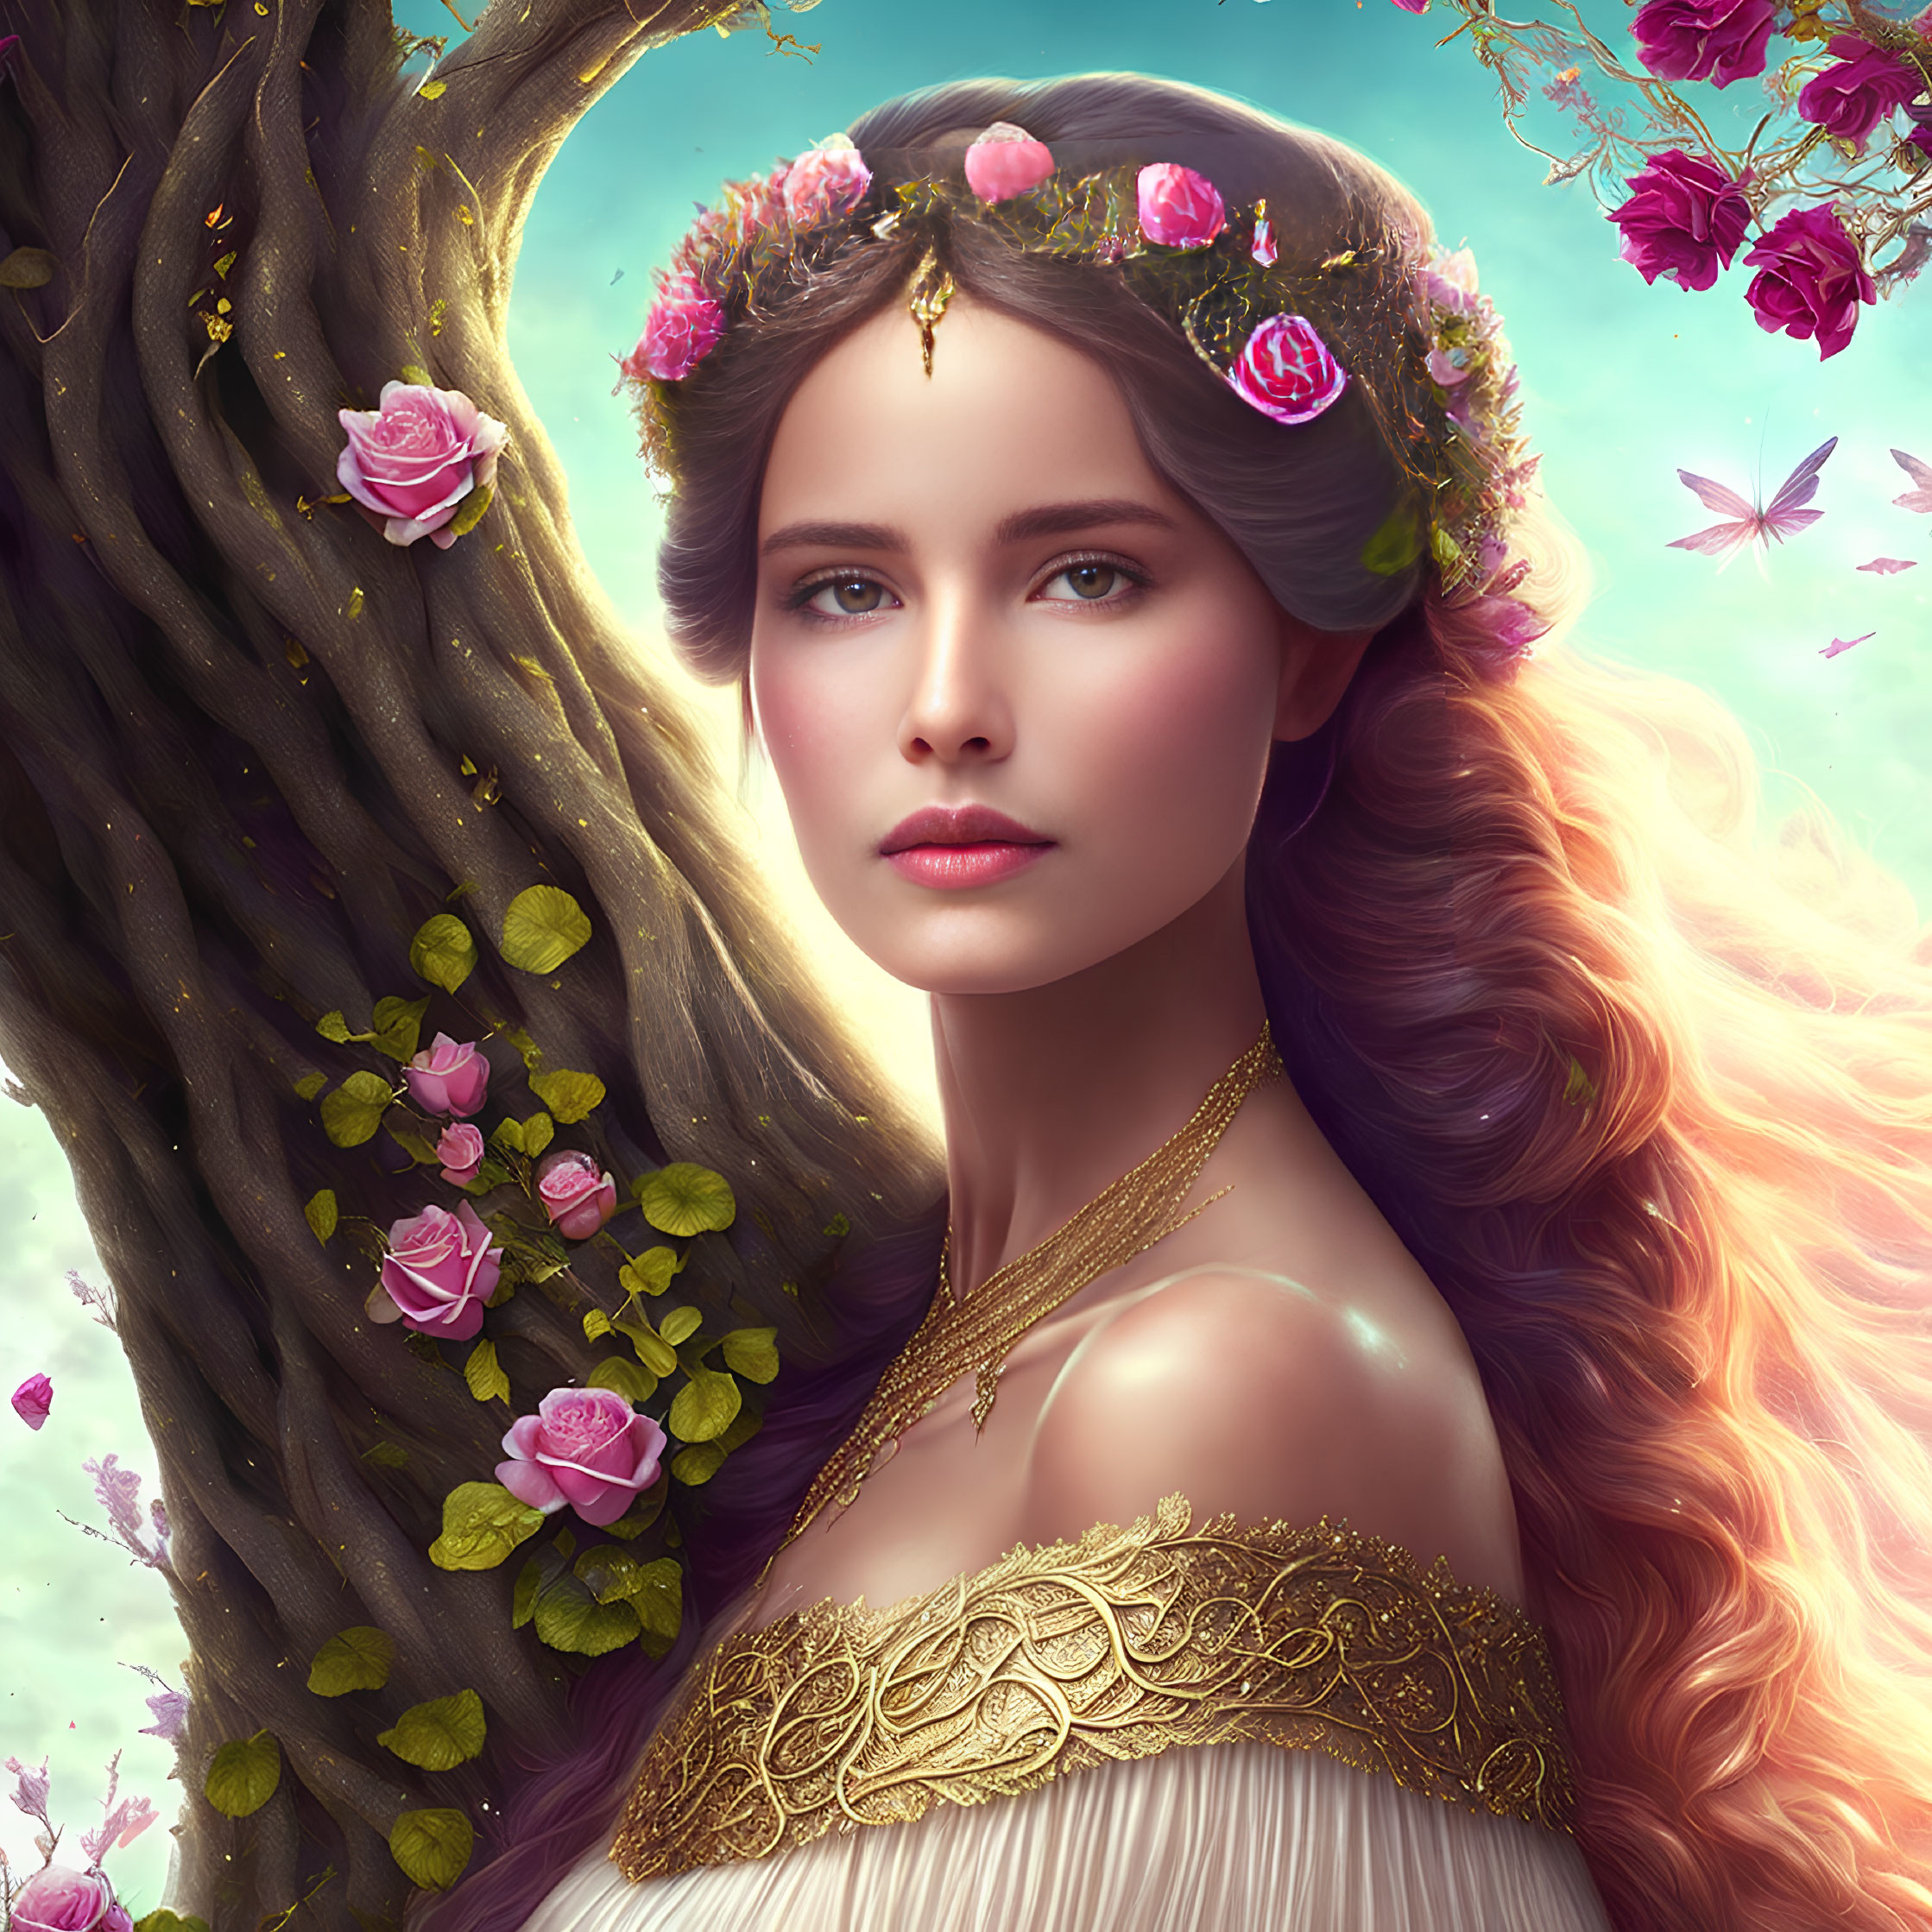 Woman with floral crown and butterflies in fantasy setting.